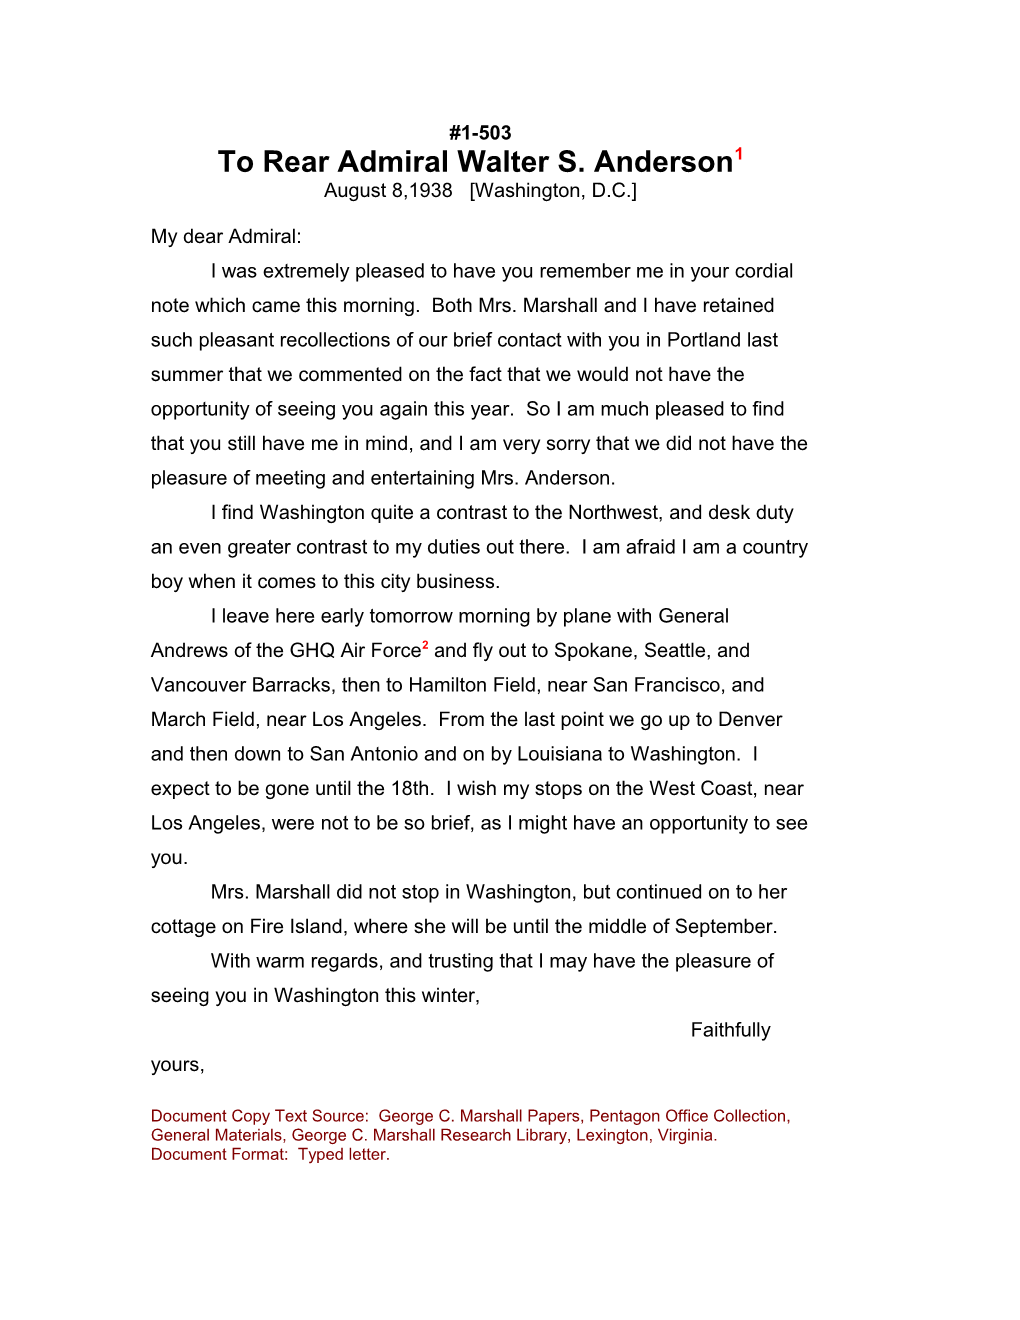 To Rear Admiral Walter S. Anderson1